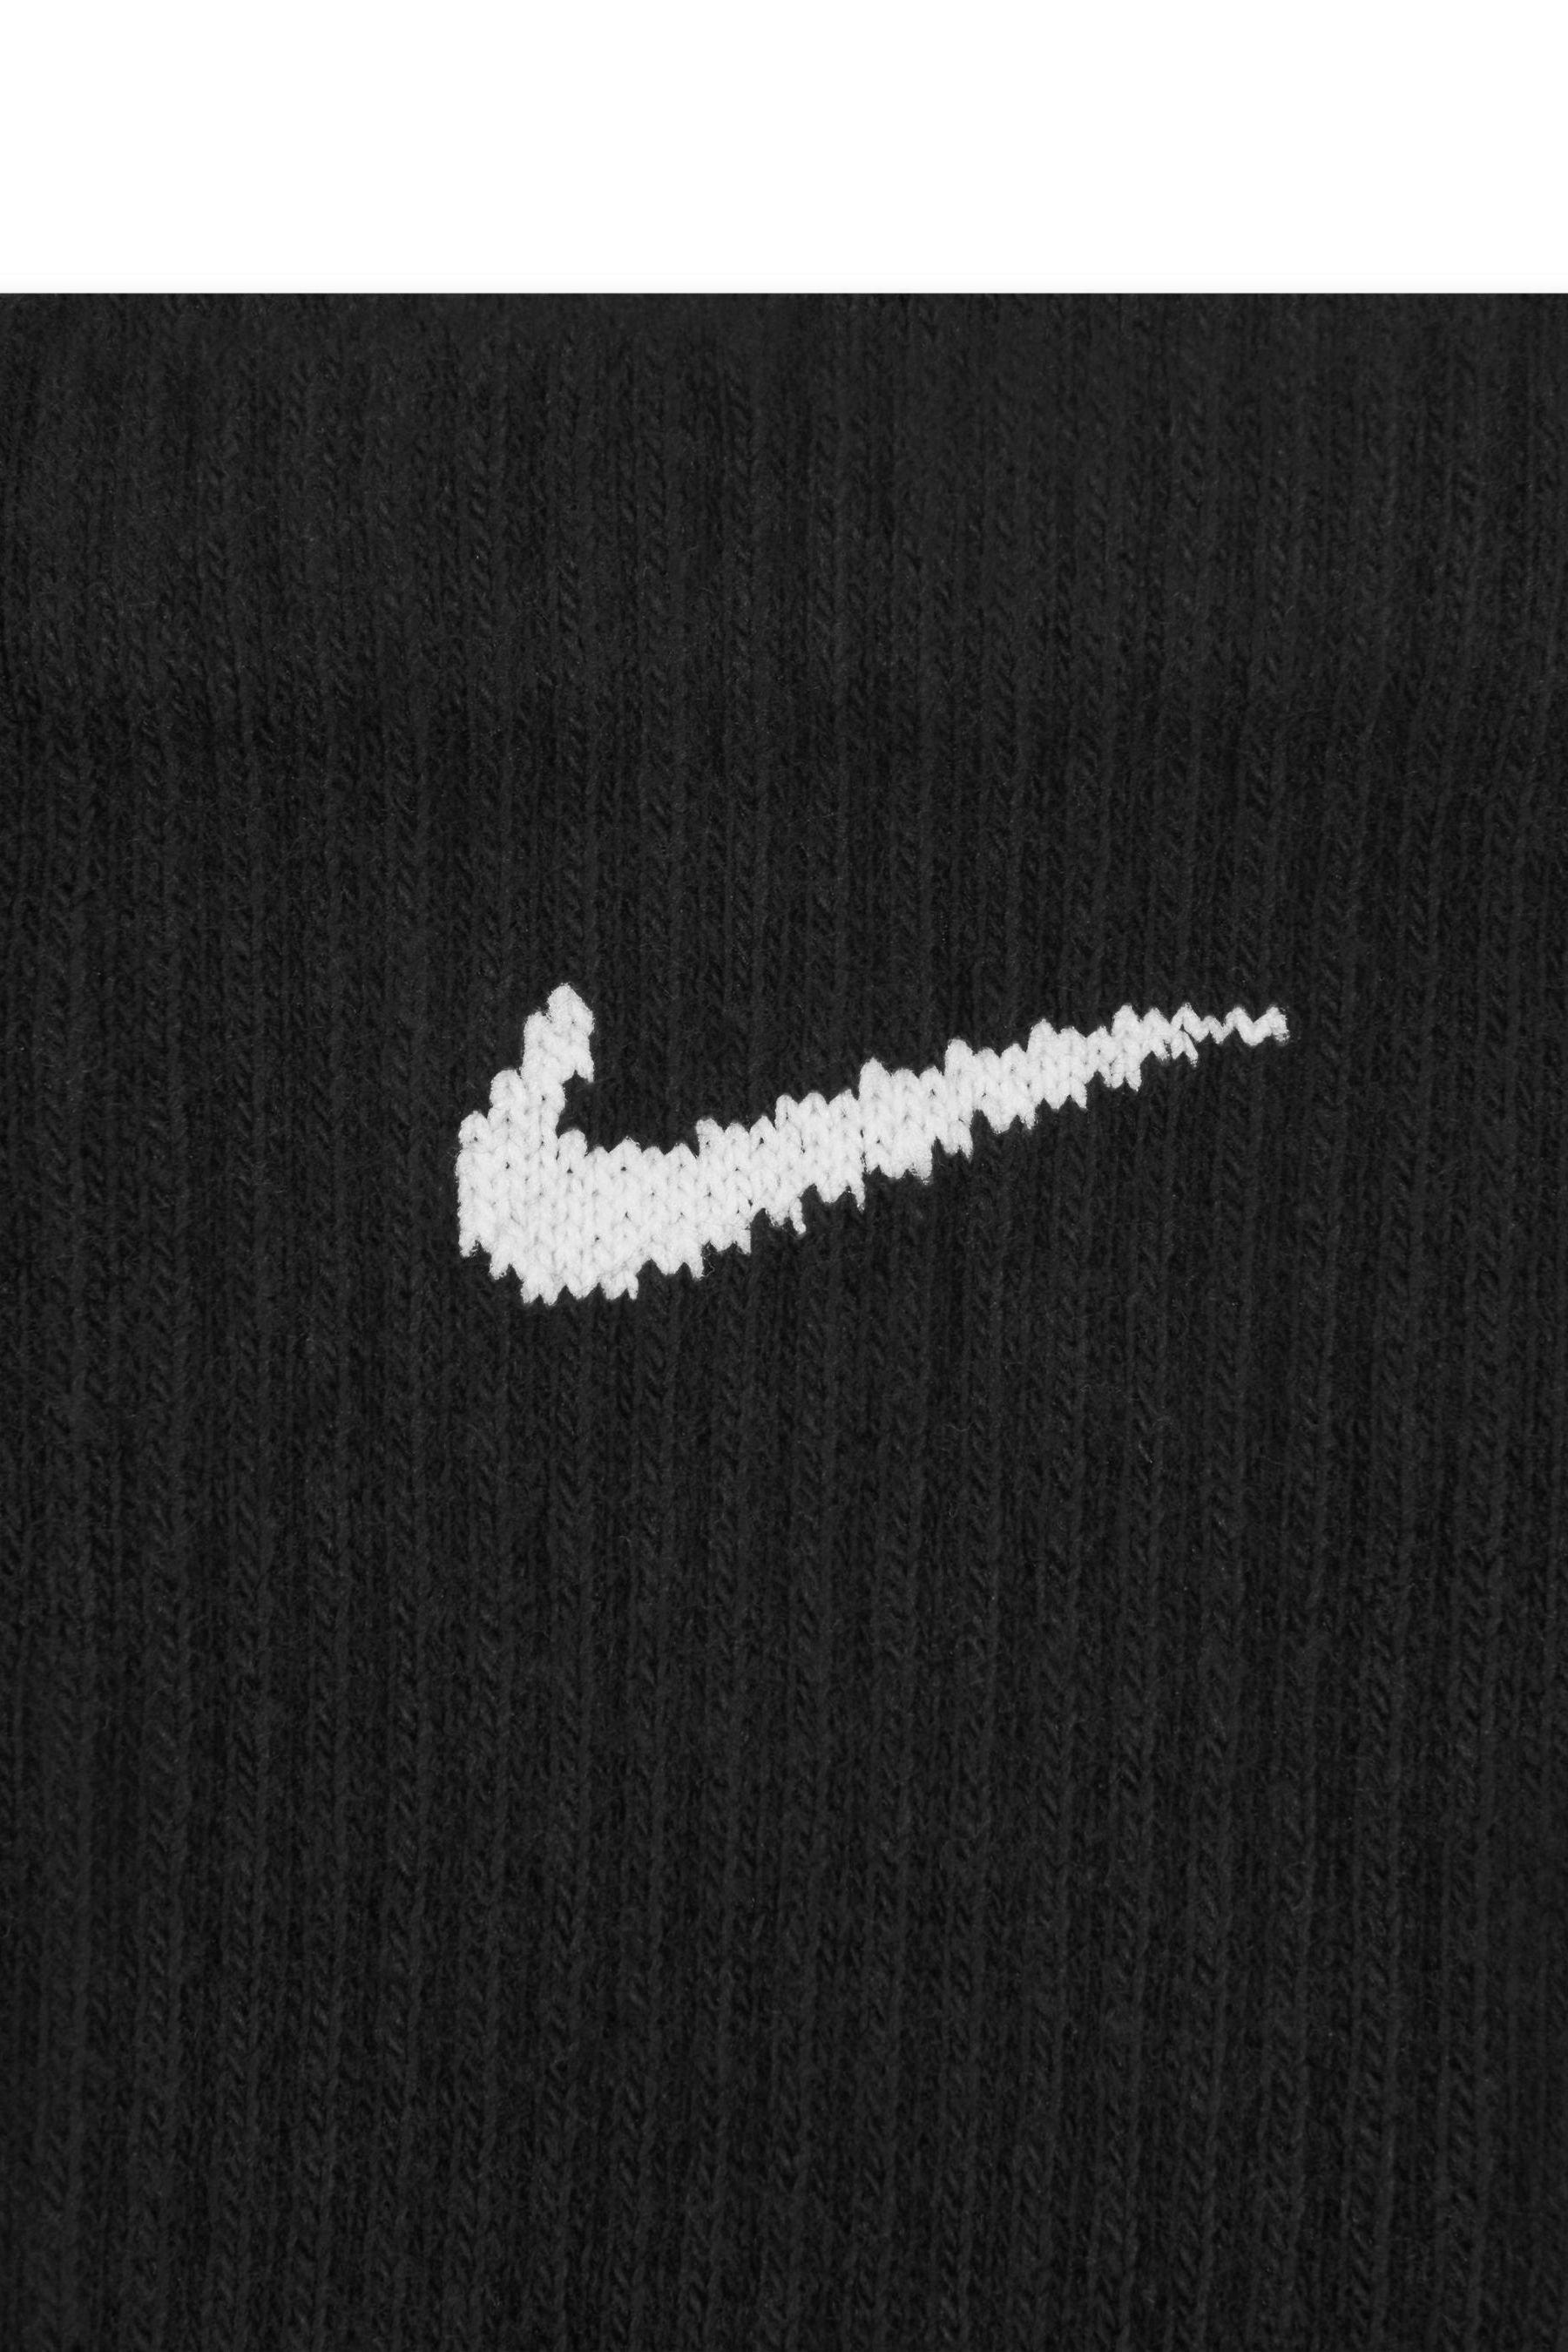 Buy Nike Black Lightweight Invisible Socks Six Pack from the Next UK ...